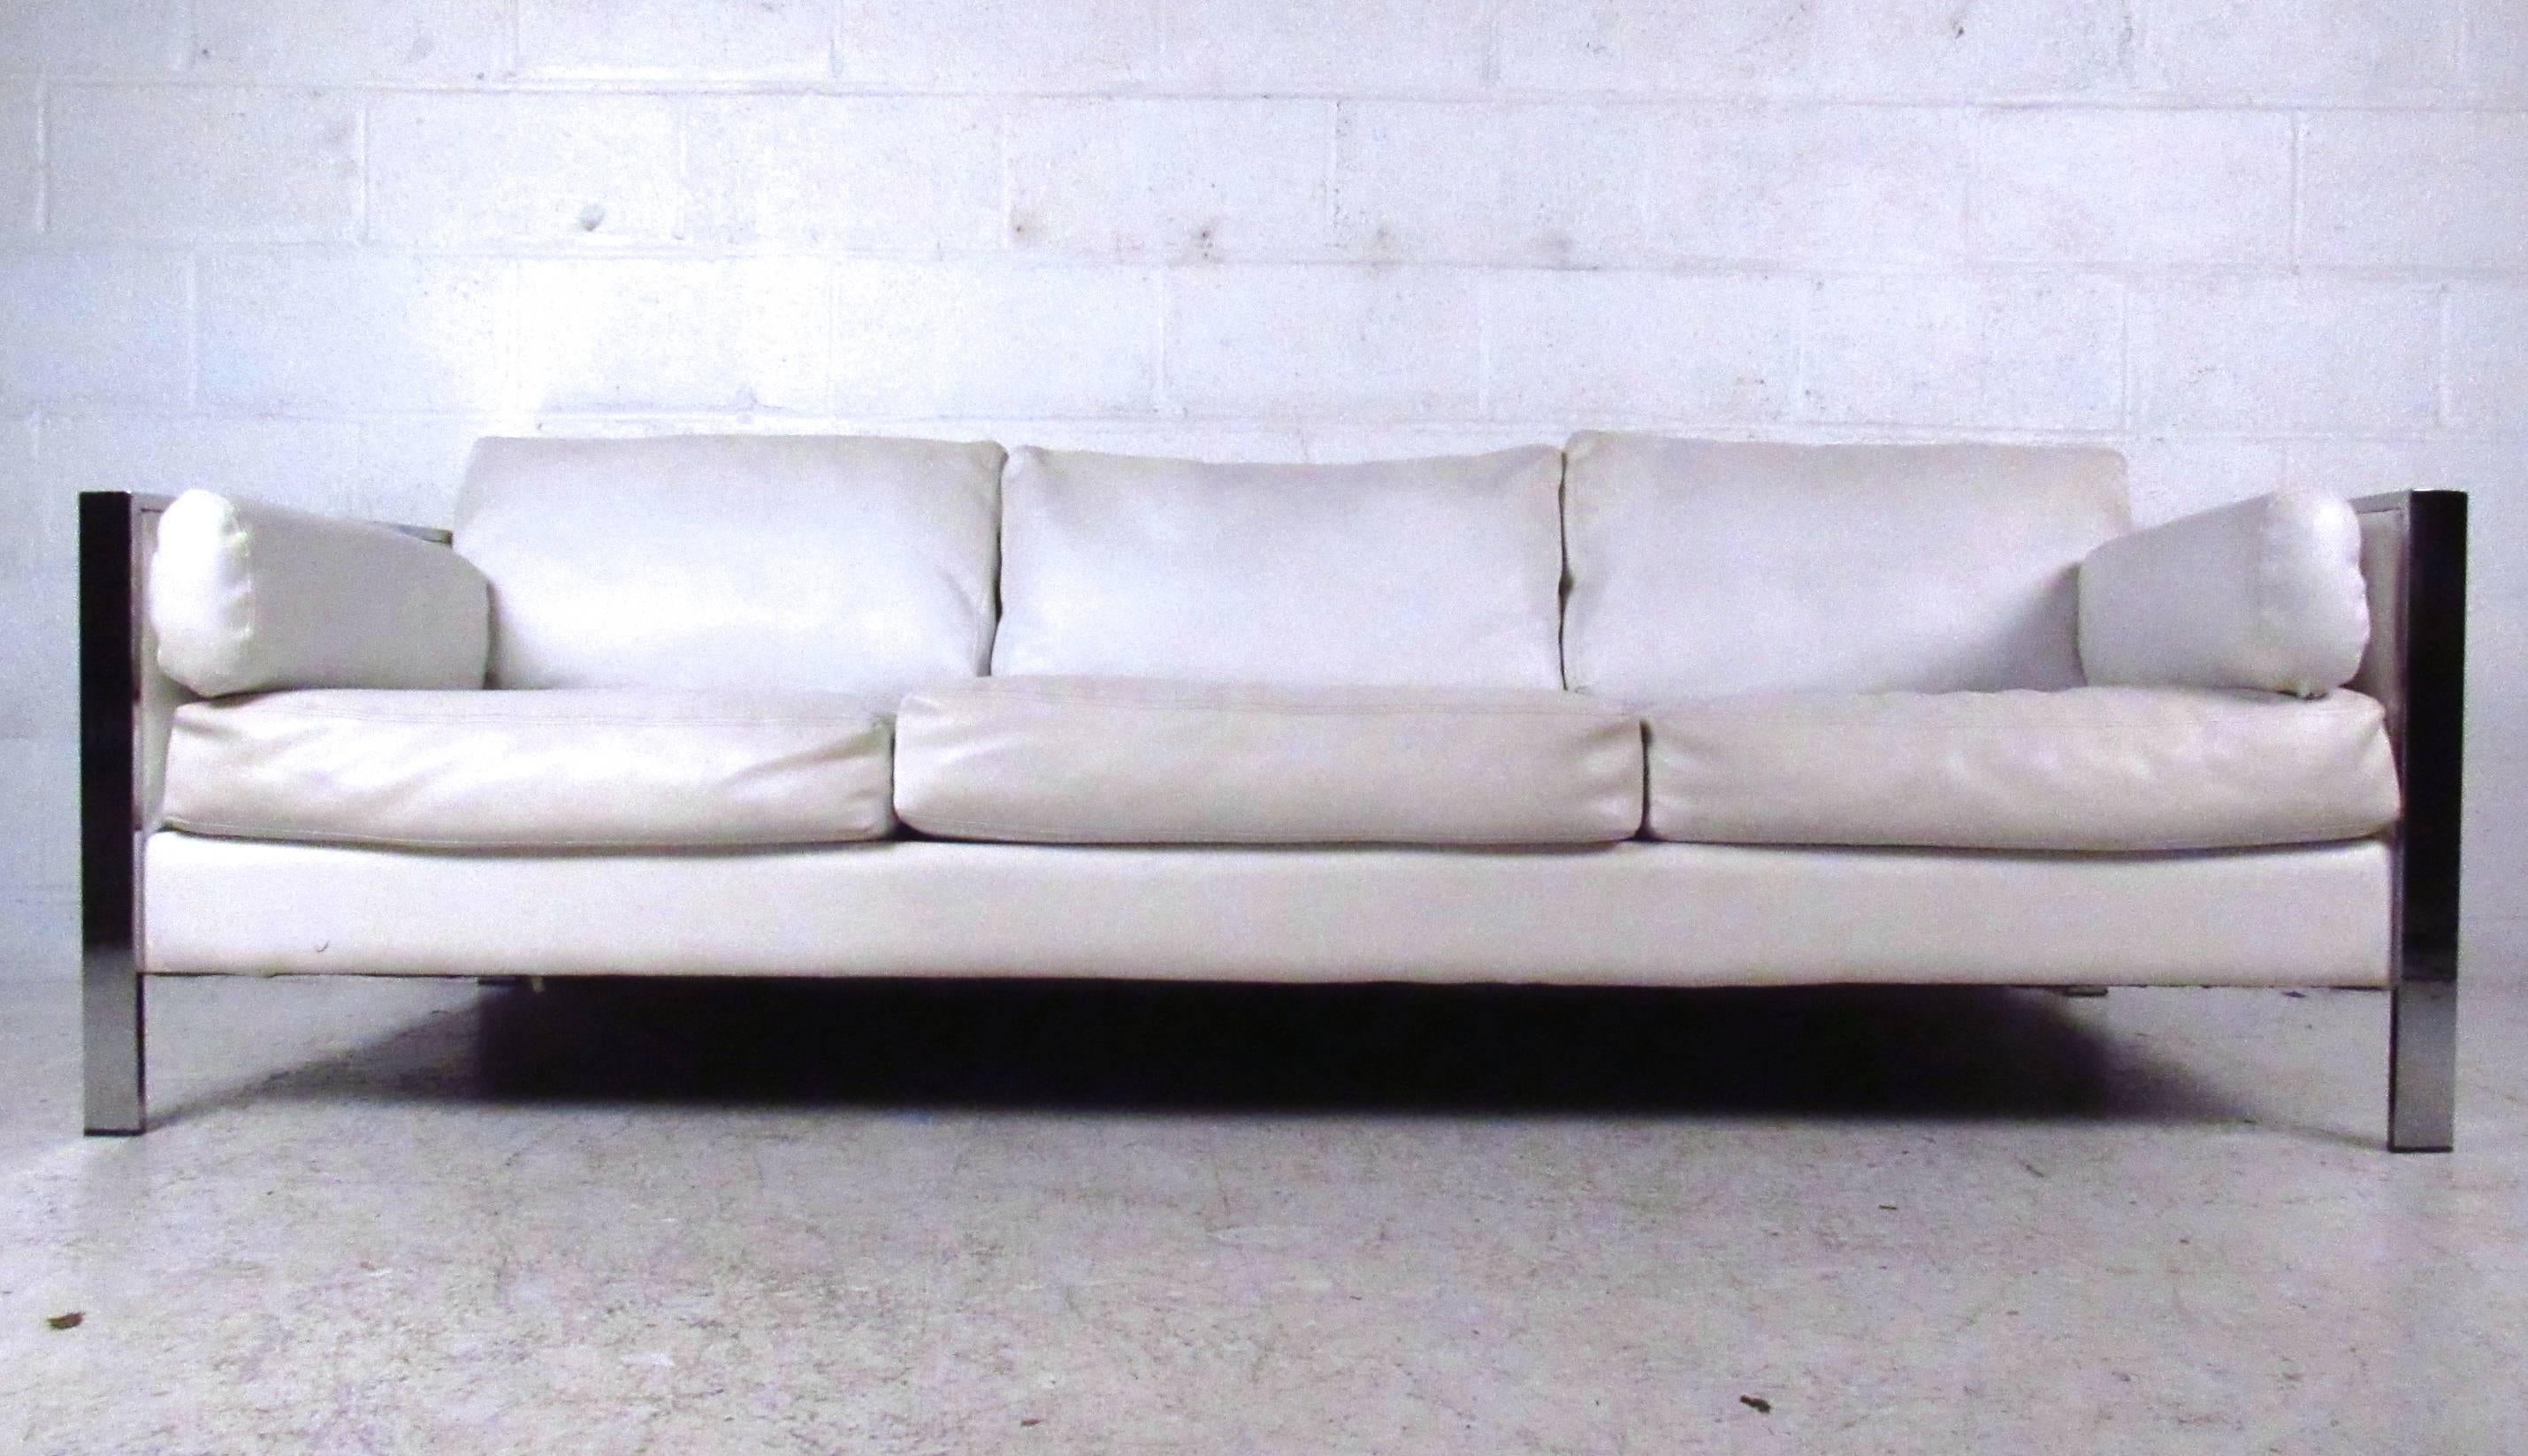 This vintage vinyl sofa features comfortable cushioning and sleek midcentury design. Sturdy chrome frame with strong lines adds to the appeal. Comfortable and stylish seating addition to any interior. Please confirm item location (NY or NJ).